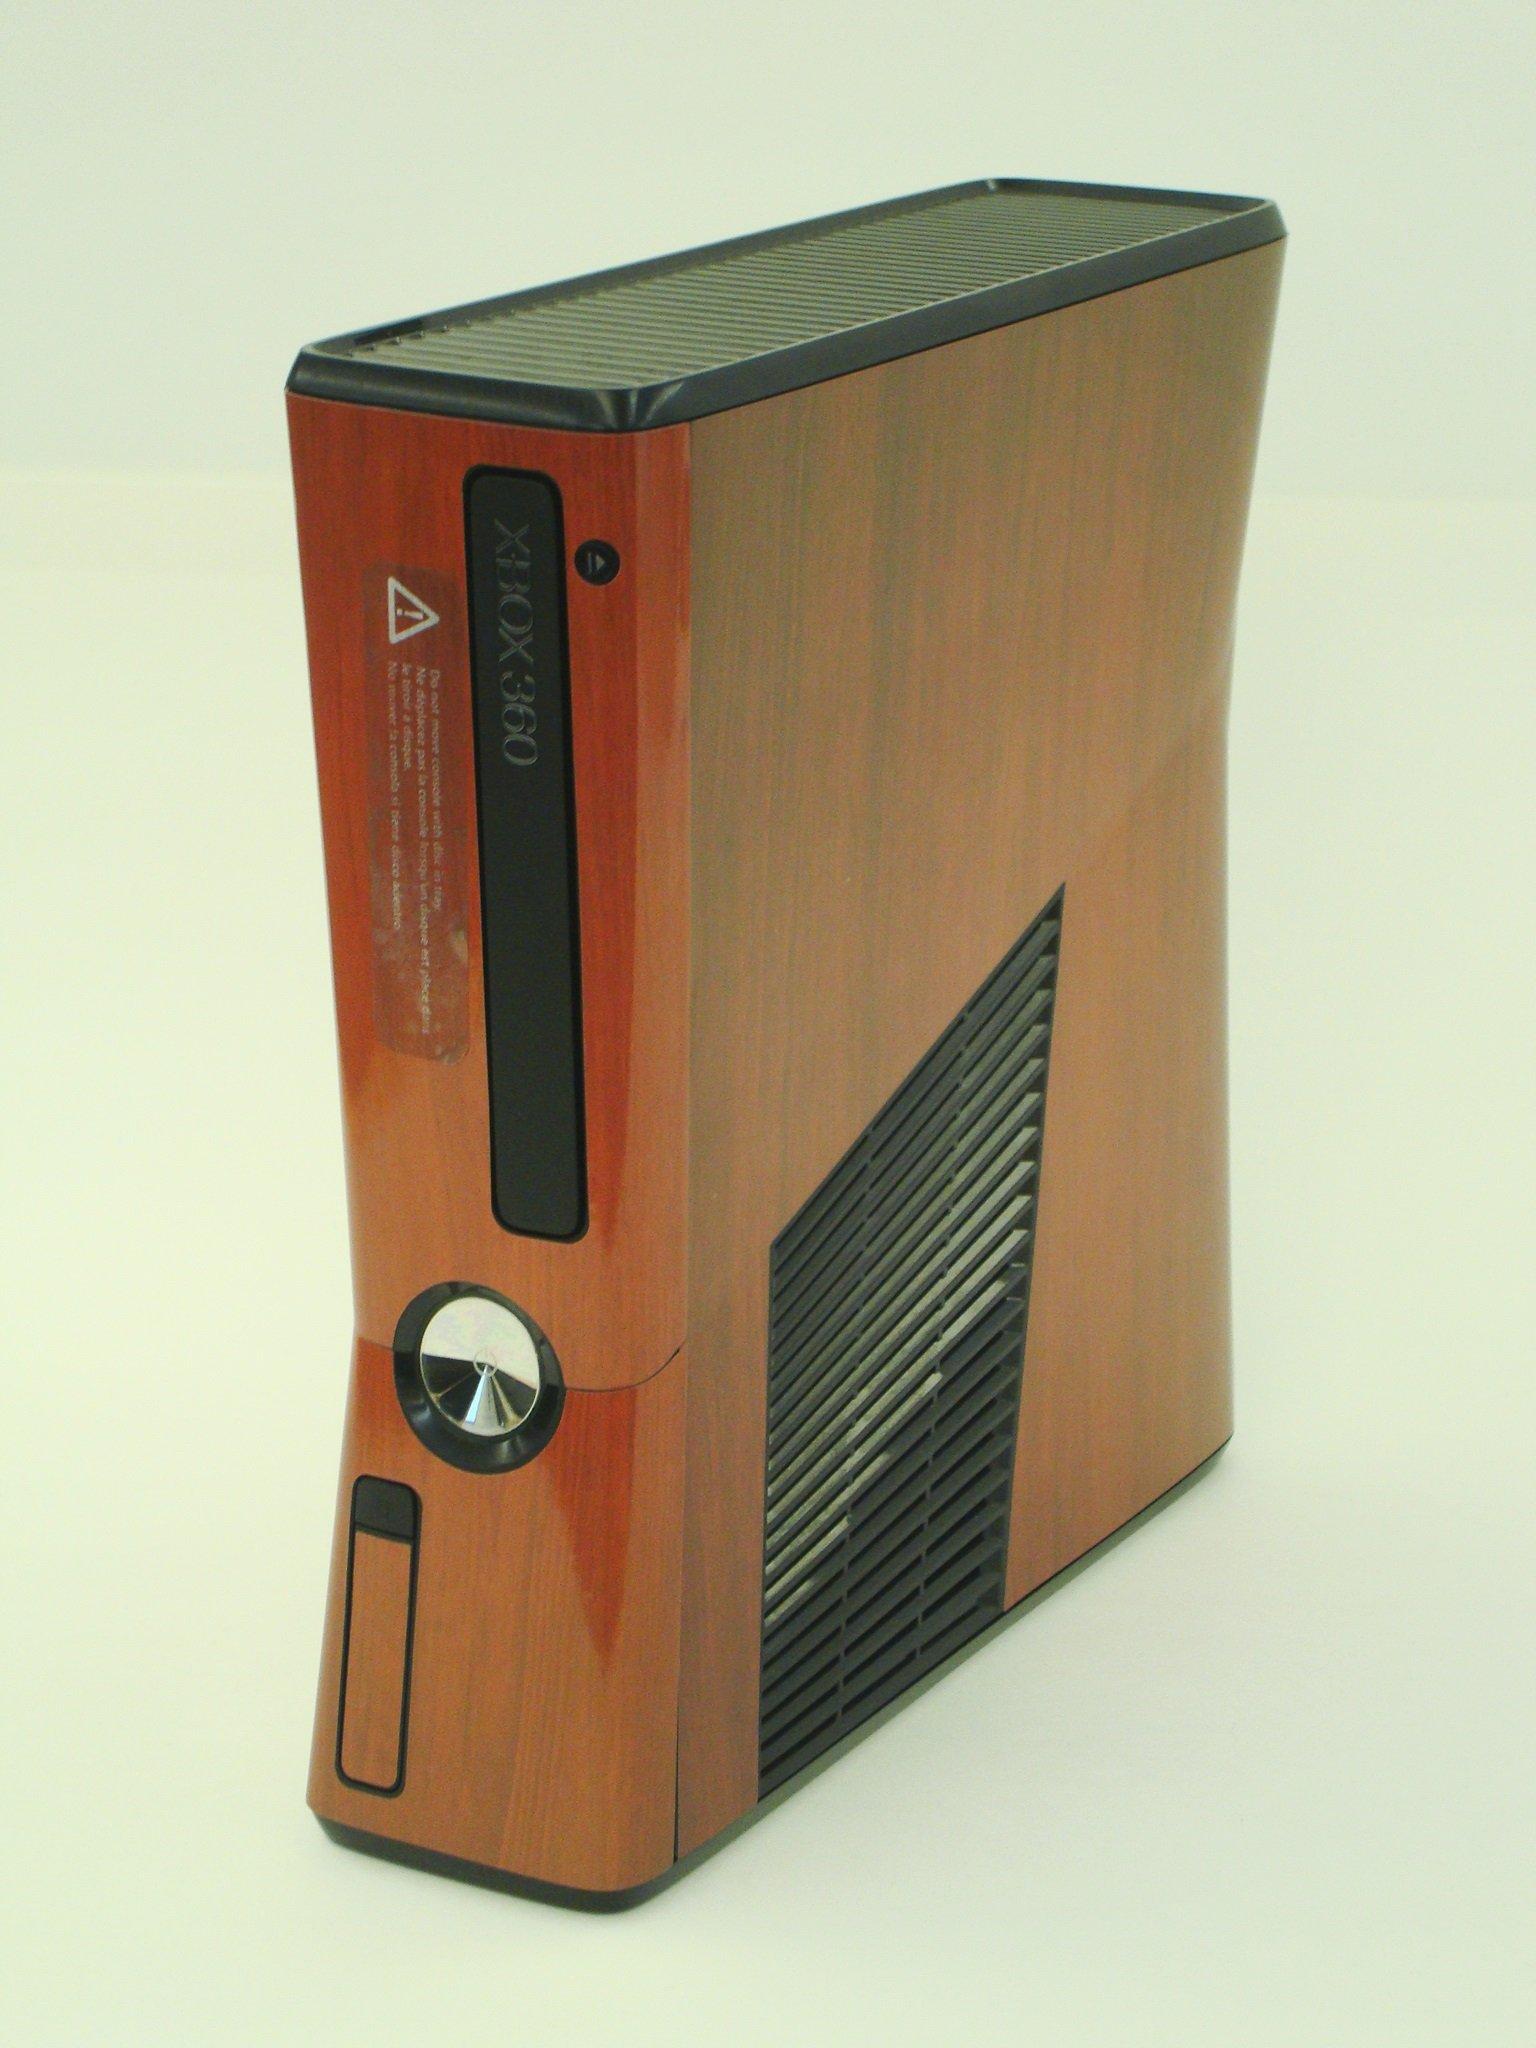 How Much Are Used Xbox 360 Worth?